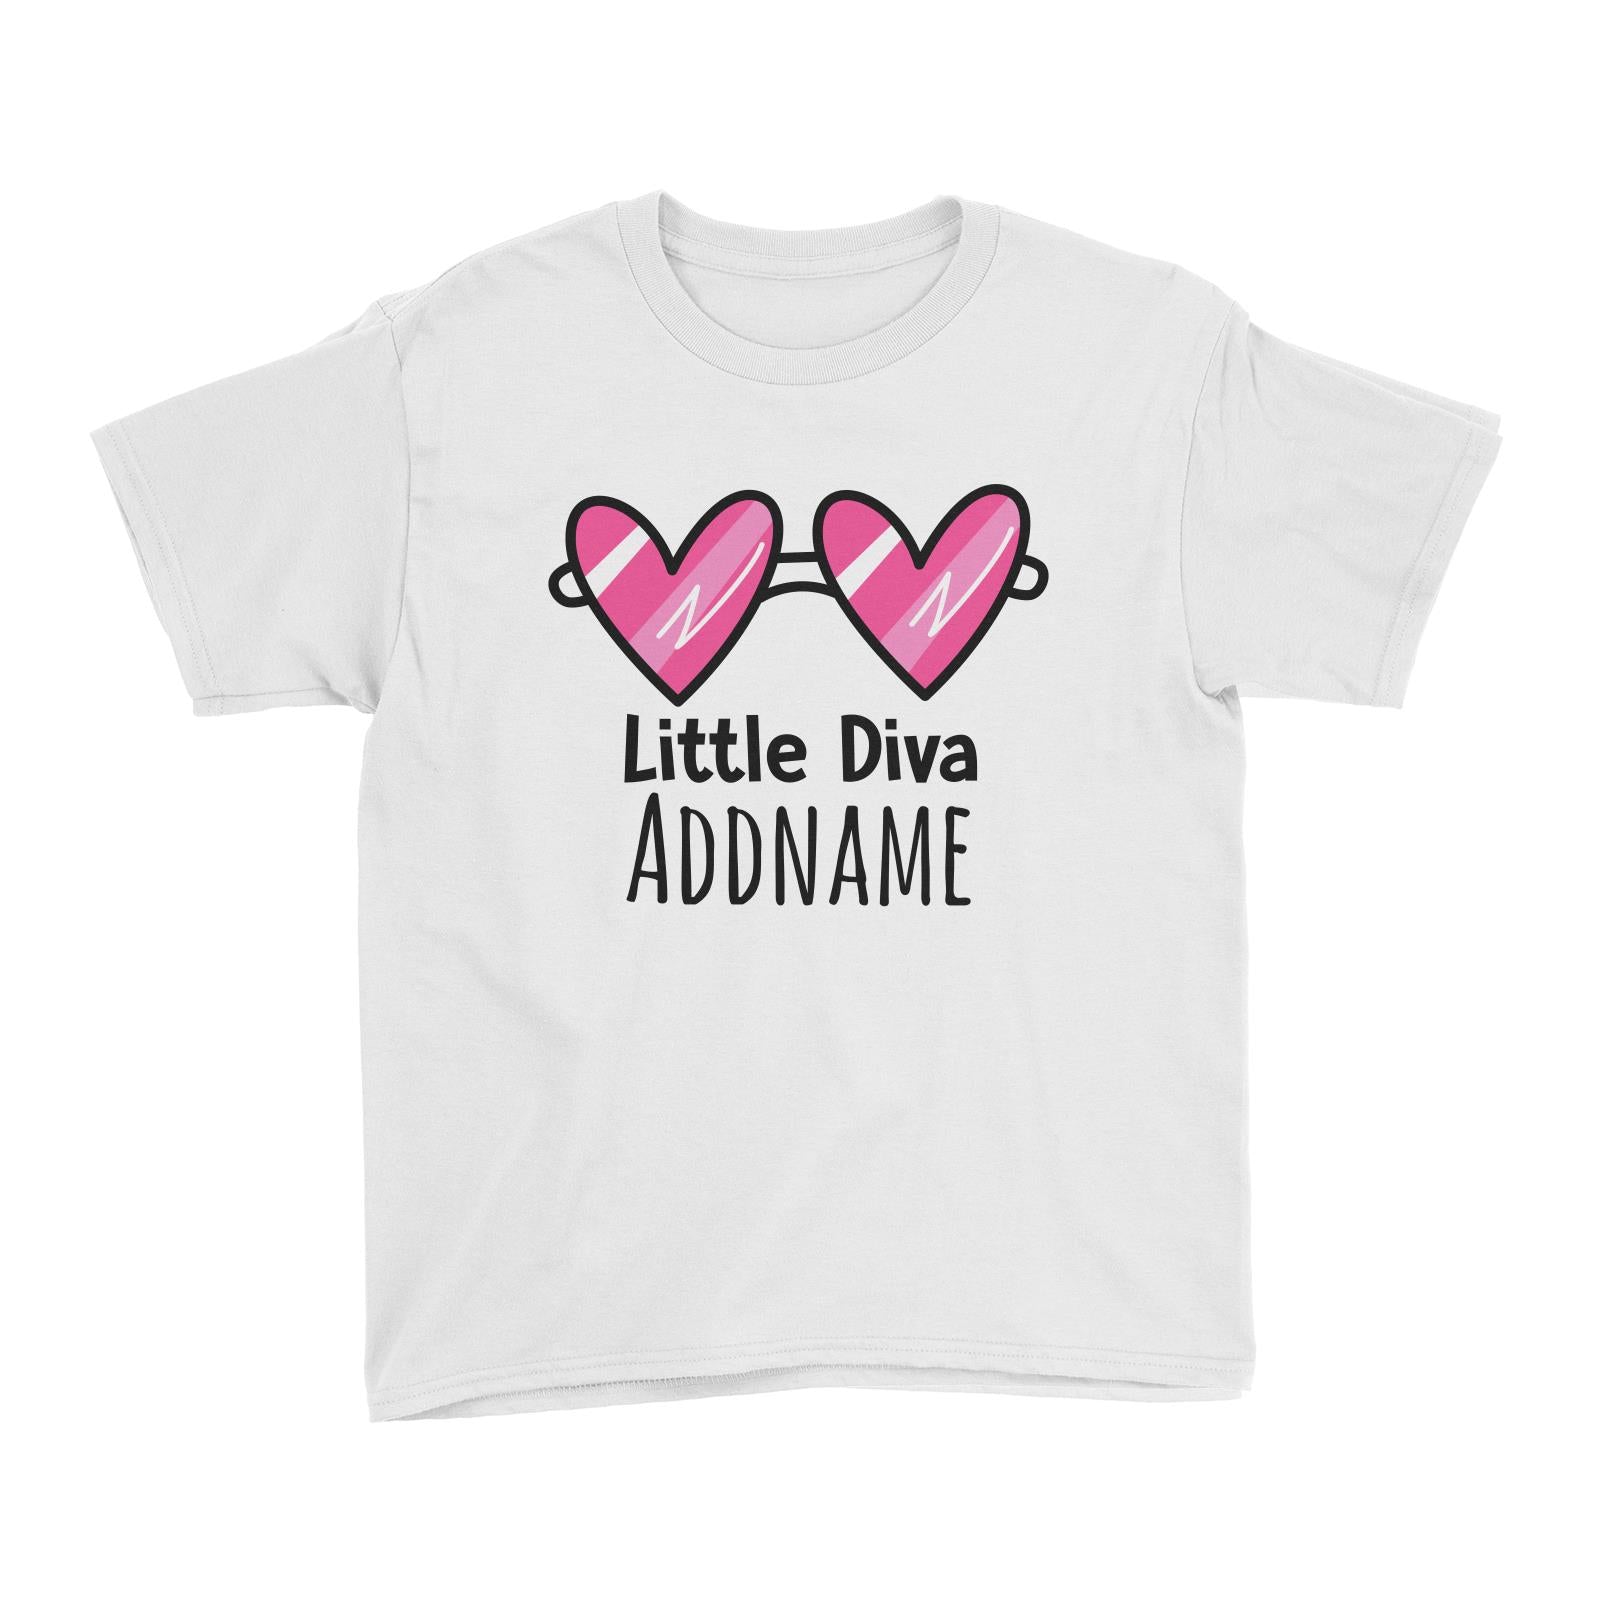 Drawn Baby Elements Little Diva Addname Kid's T-Shirt